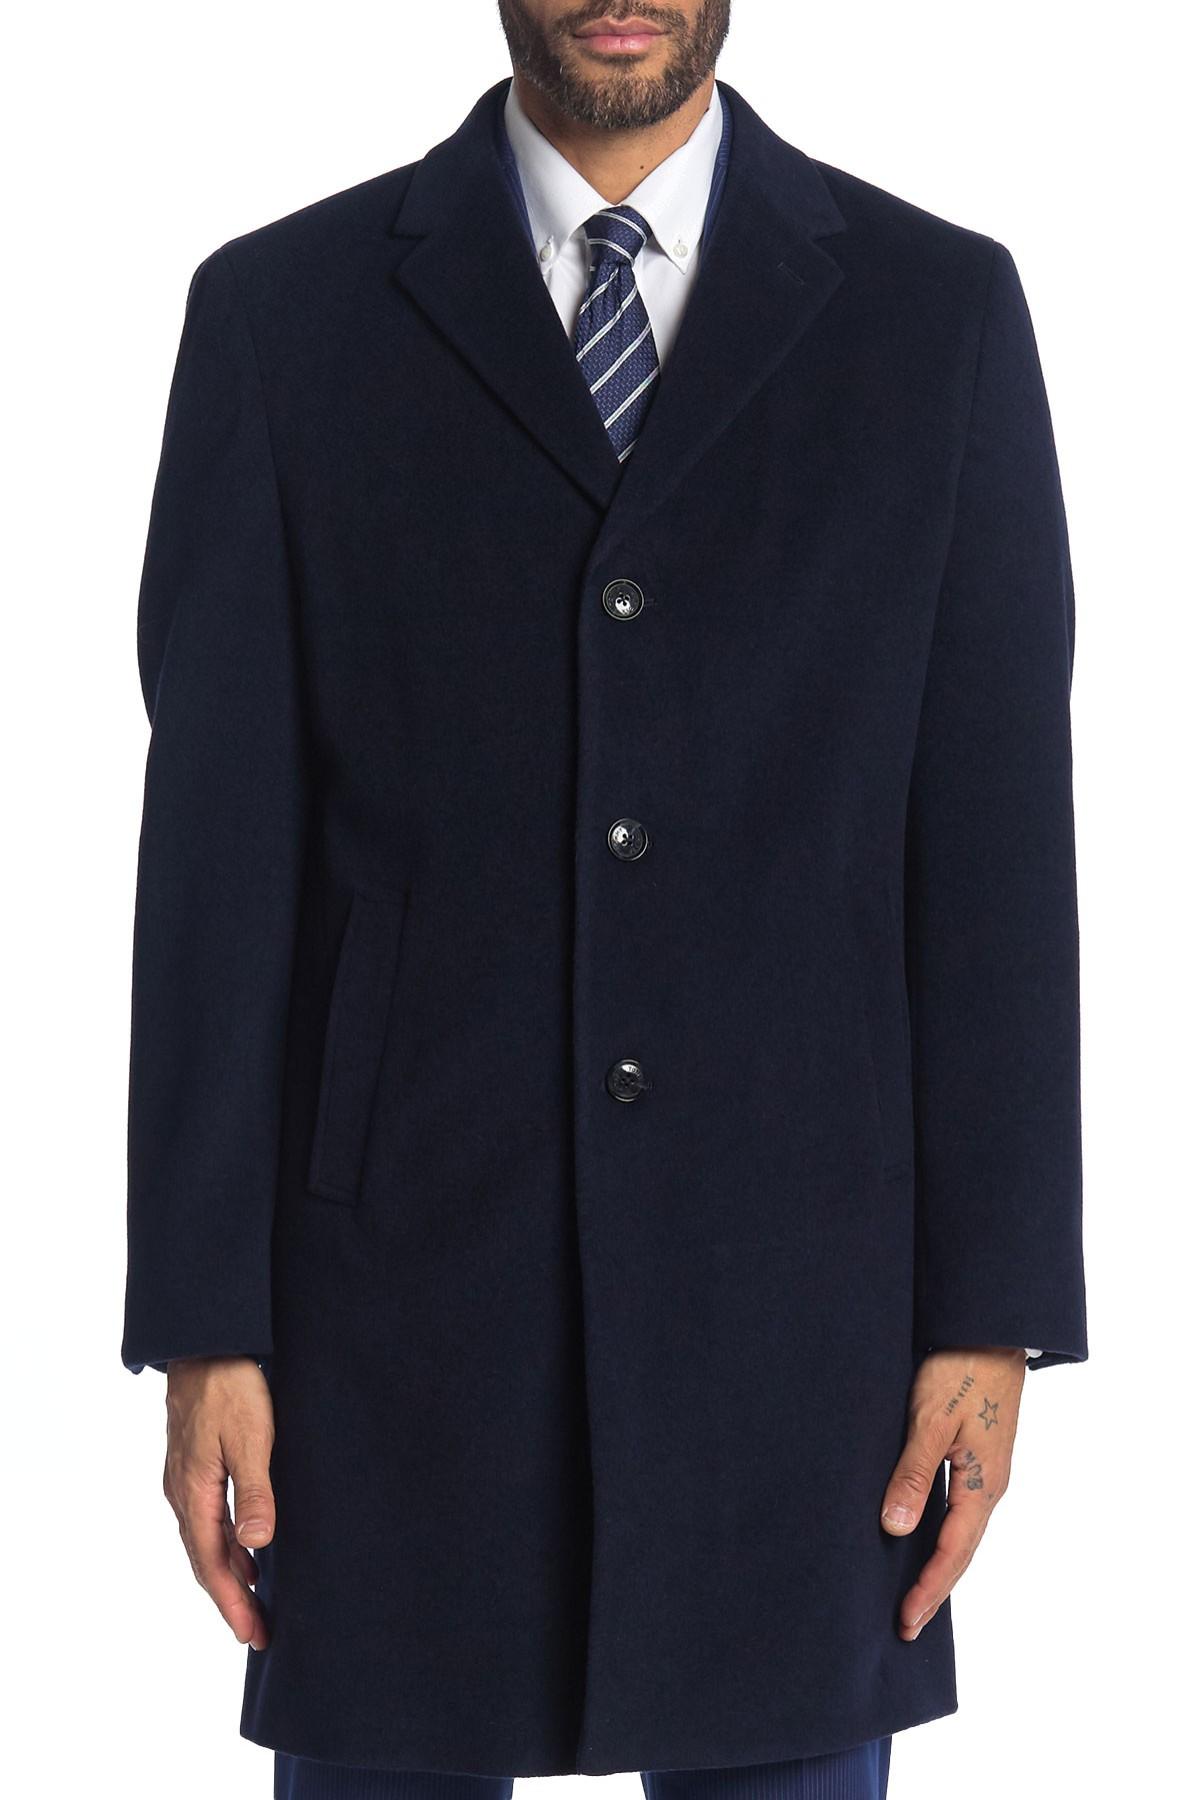 Tommy Hilfiger Cashmere Addison Wool-blend Trim Fit Overcoat in Navy ...